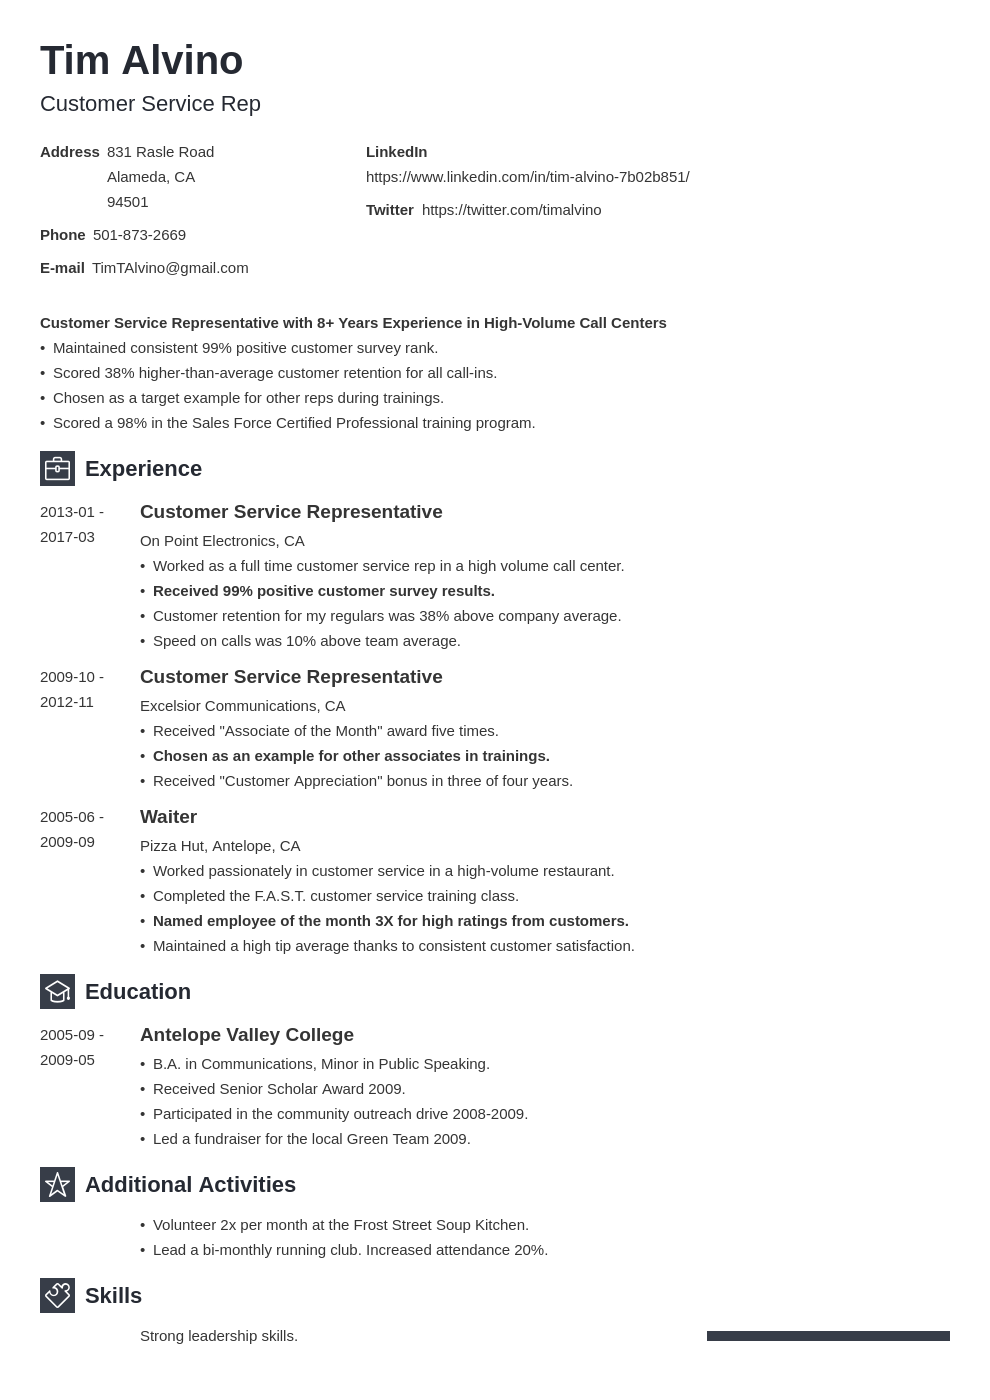 Short And Engaging Pitch For Resume - Front End Developer ...